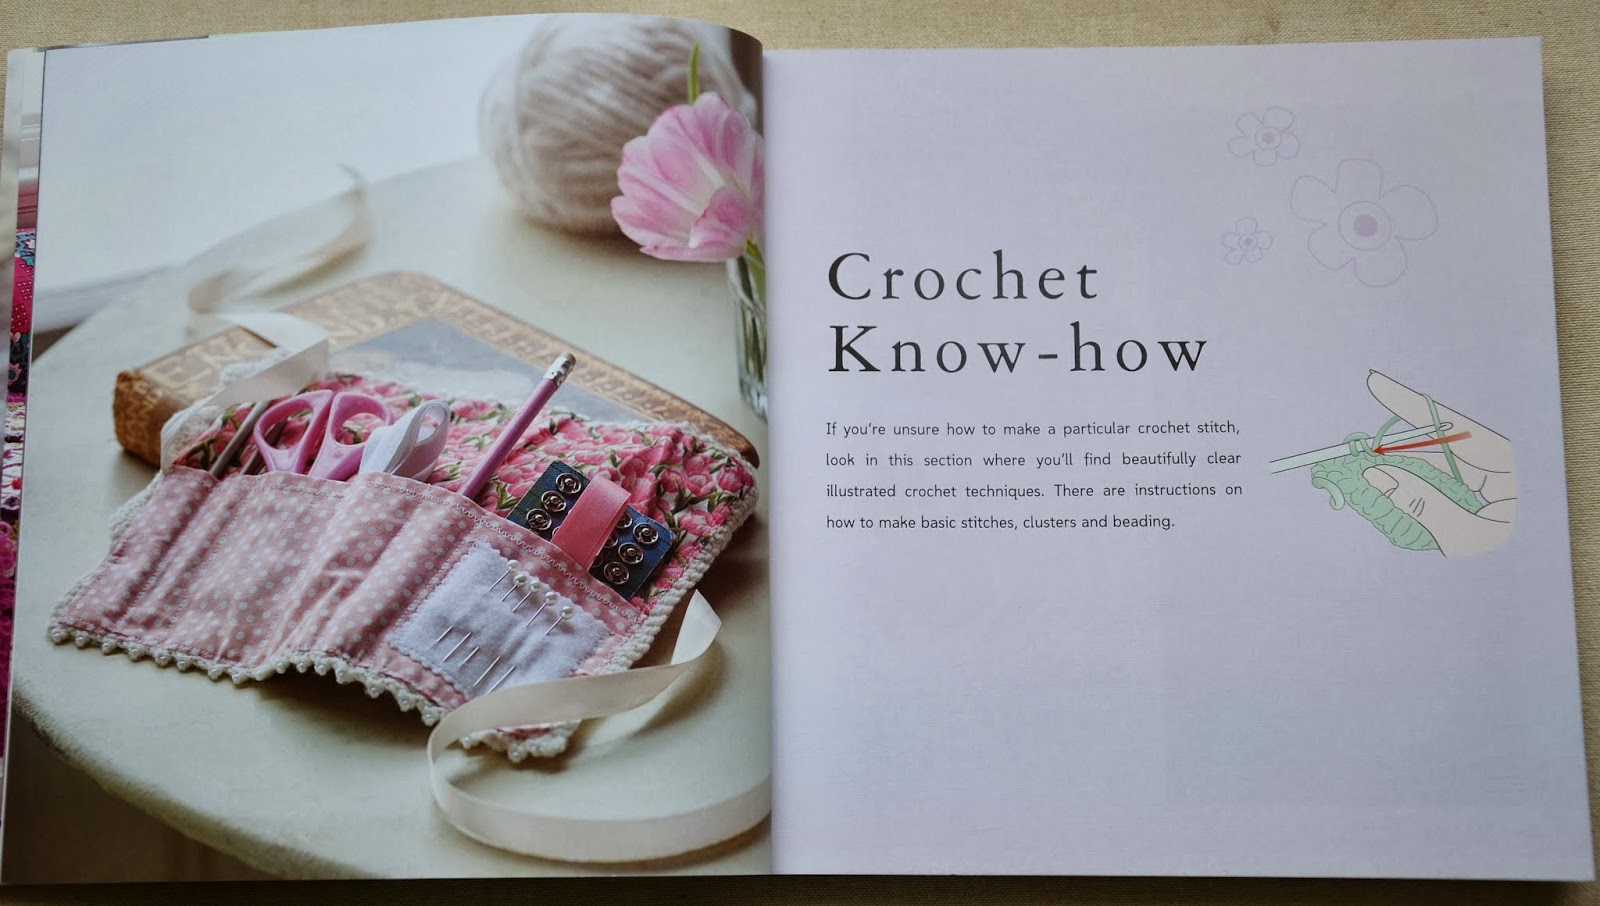 Cute & Easy Crochet with Flowers, Book by Nicki Trench, Official  Publisher Page